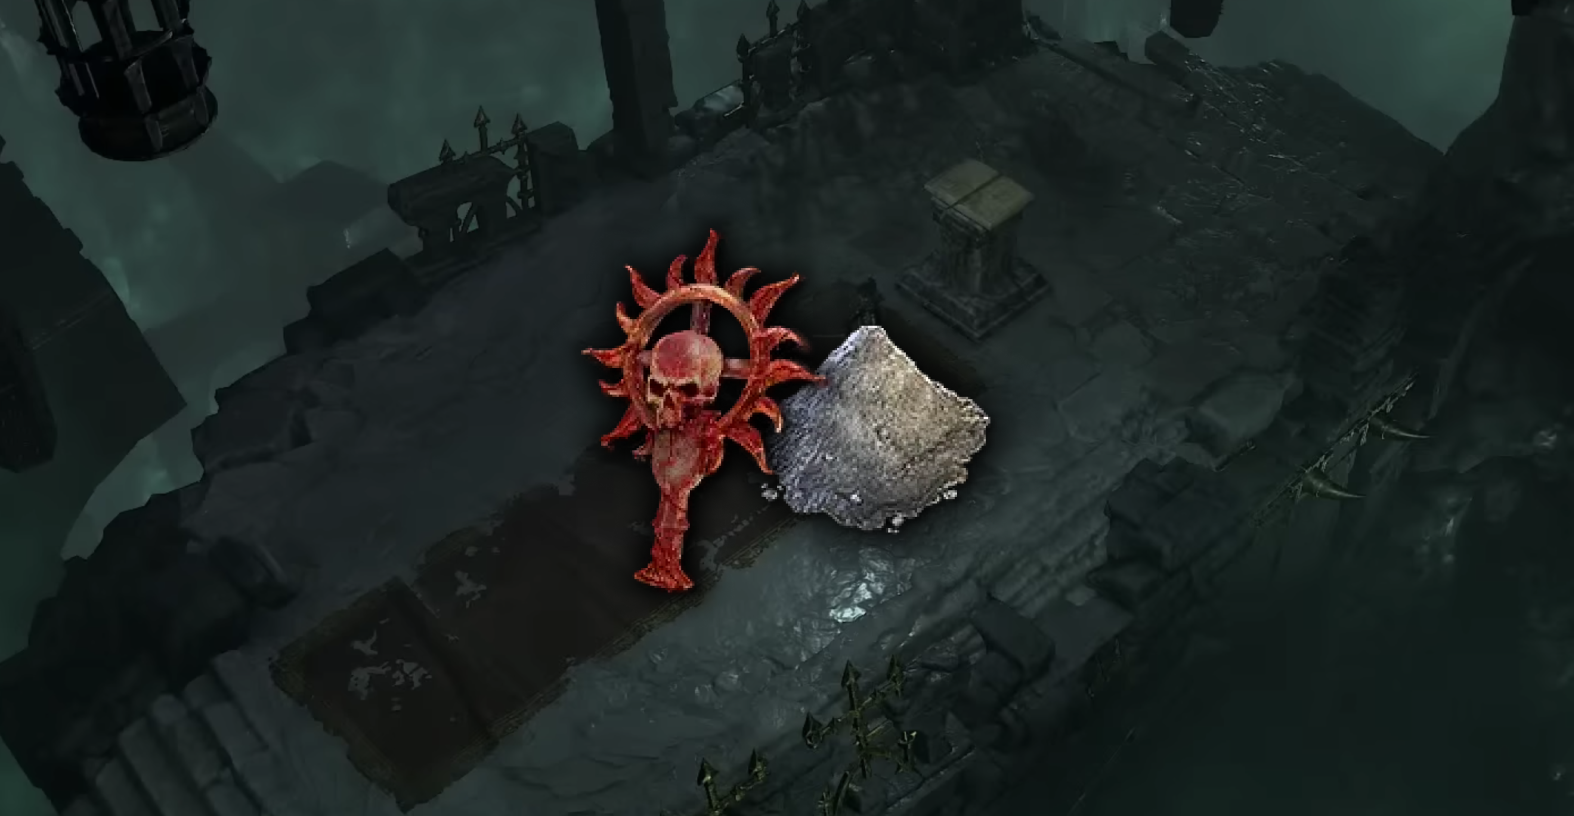 Significantly Reduced Cost for Bloodforged Sigils